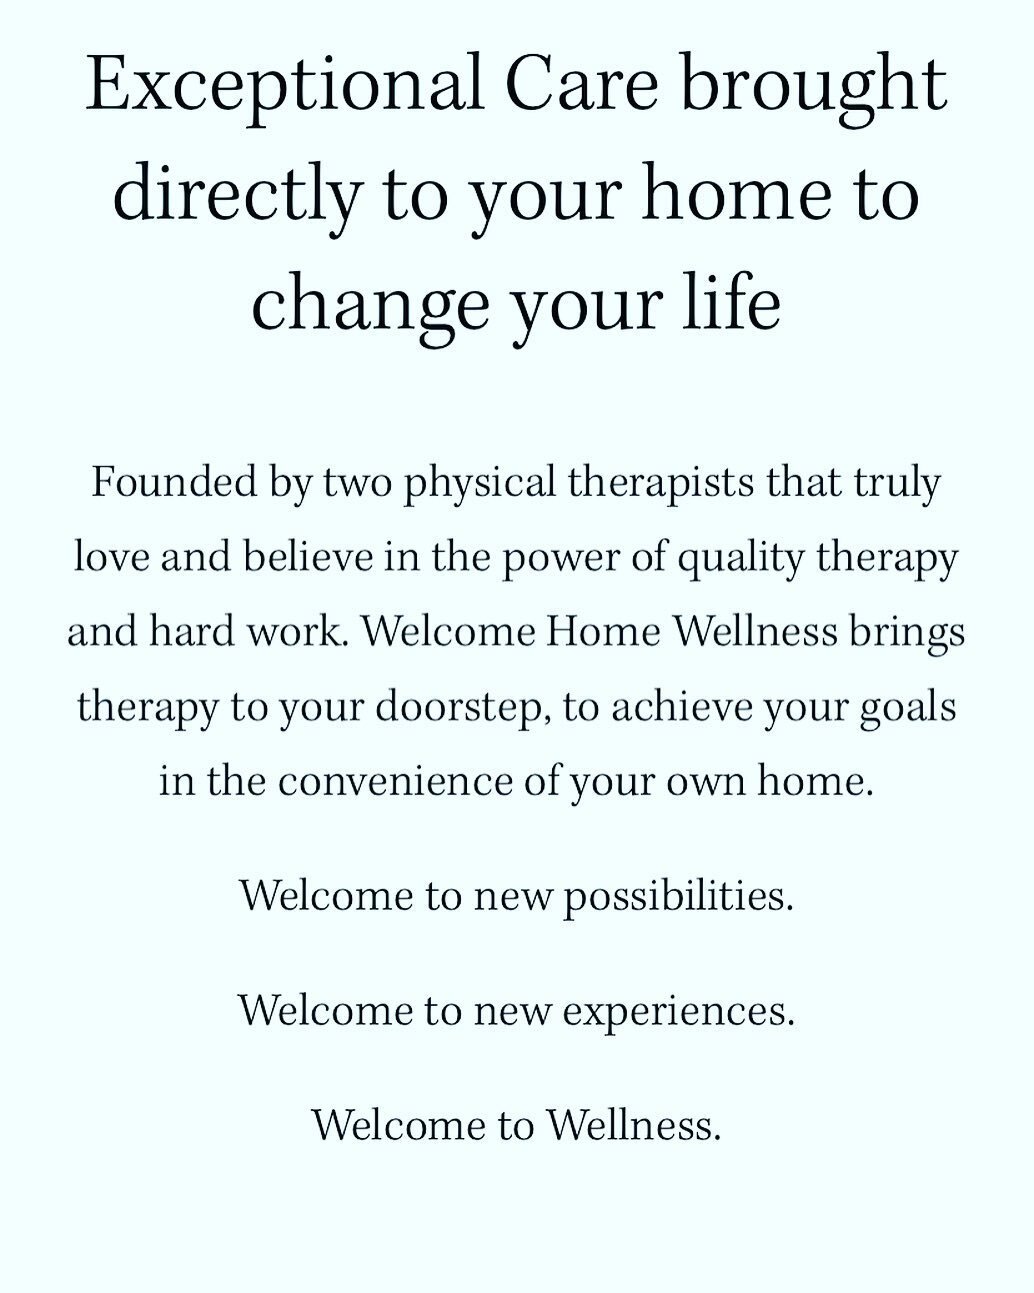 Welcome Home Wellness is ready for our next step, come join us! Now accepting new patients! Check out whwphilly.com